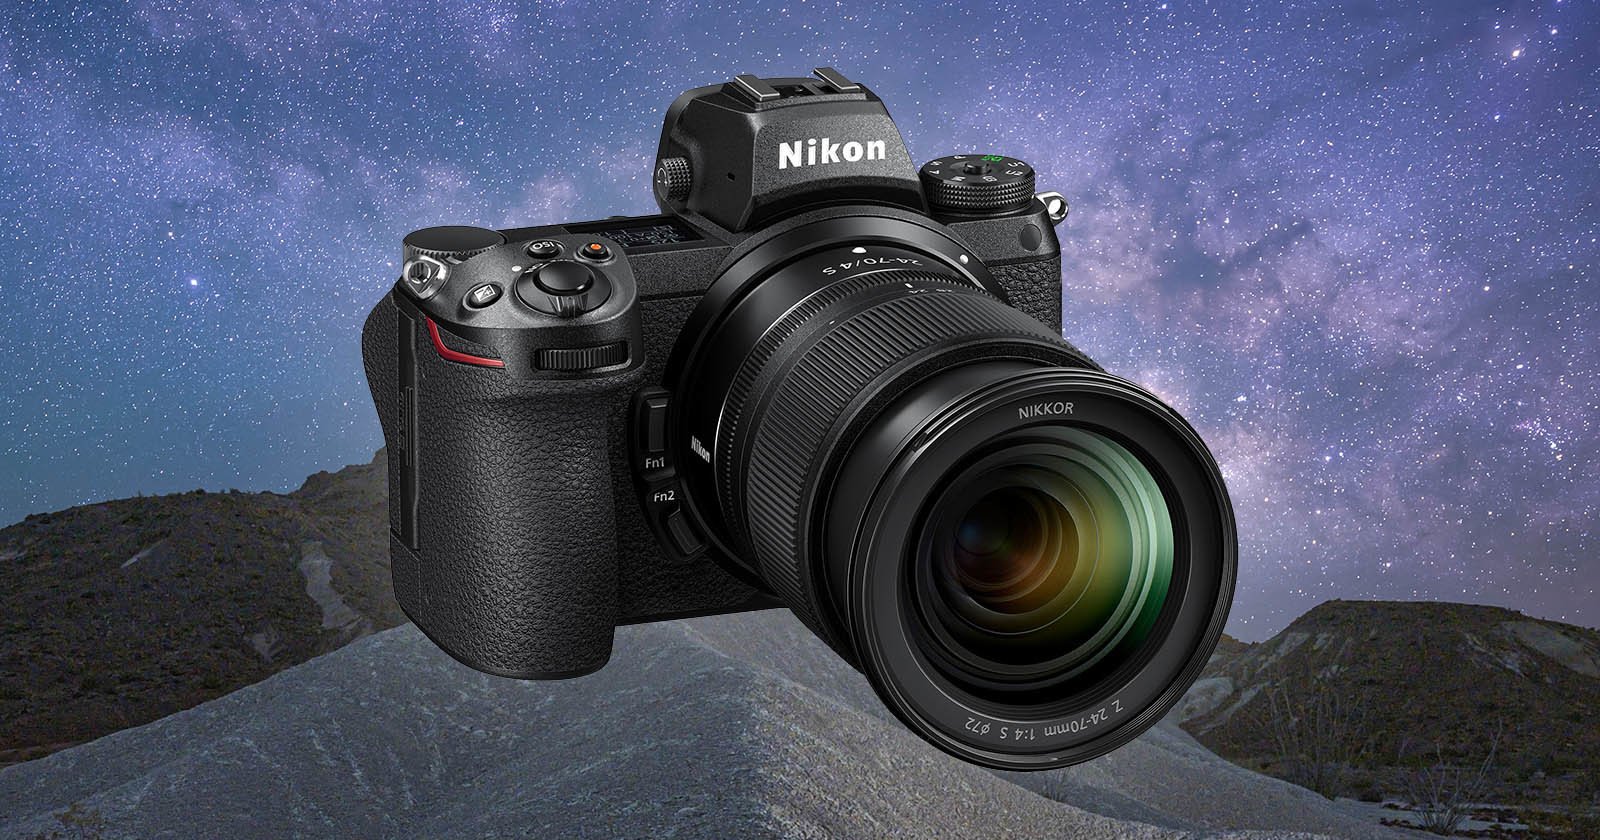 Nikon Z7 II: An Astrophotography and Nightscape Review